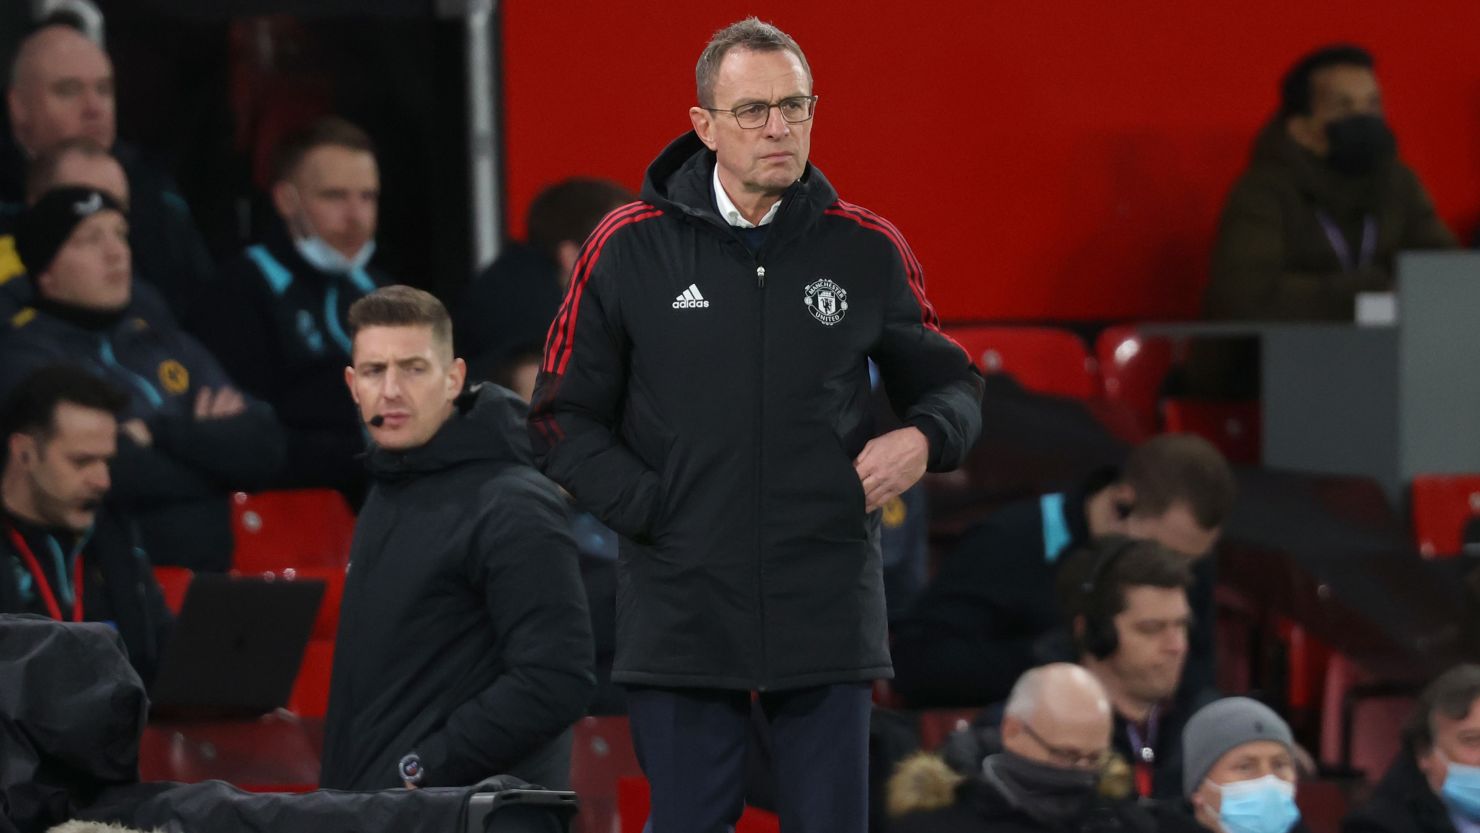 Ralf Rangnick looks on during the match against Wolverhampton Wanderers at Old Trafford on January 3, 2022.